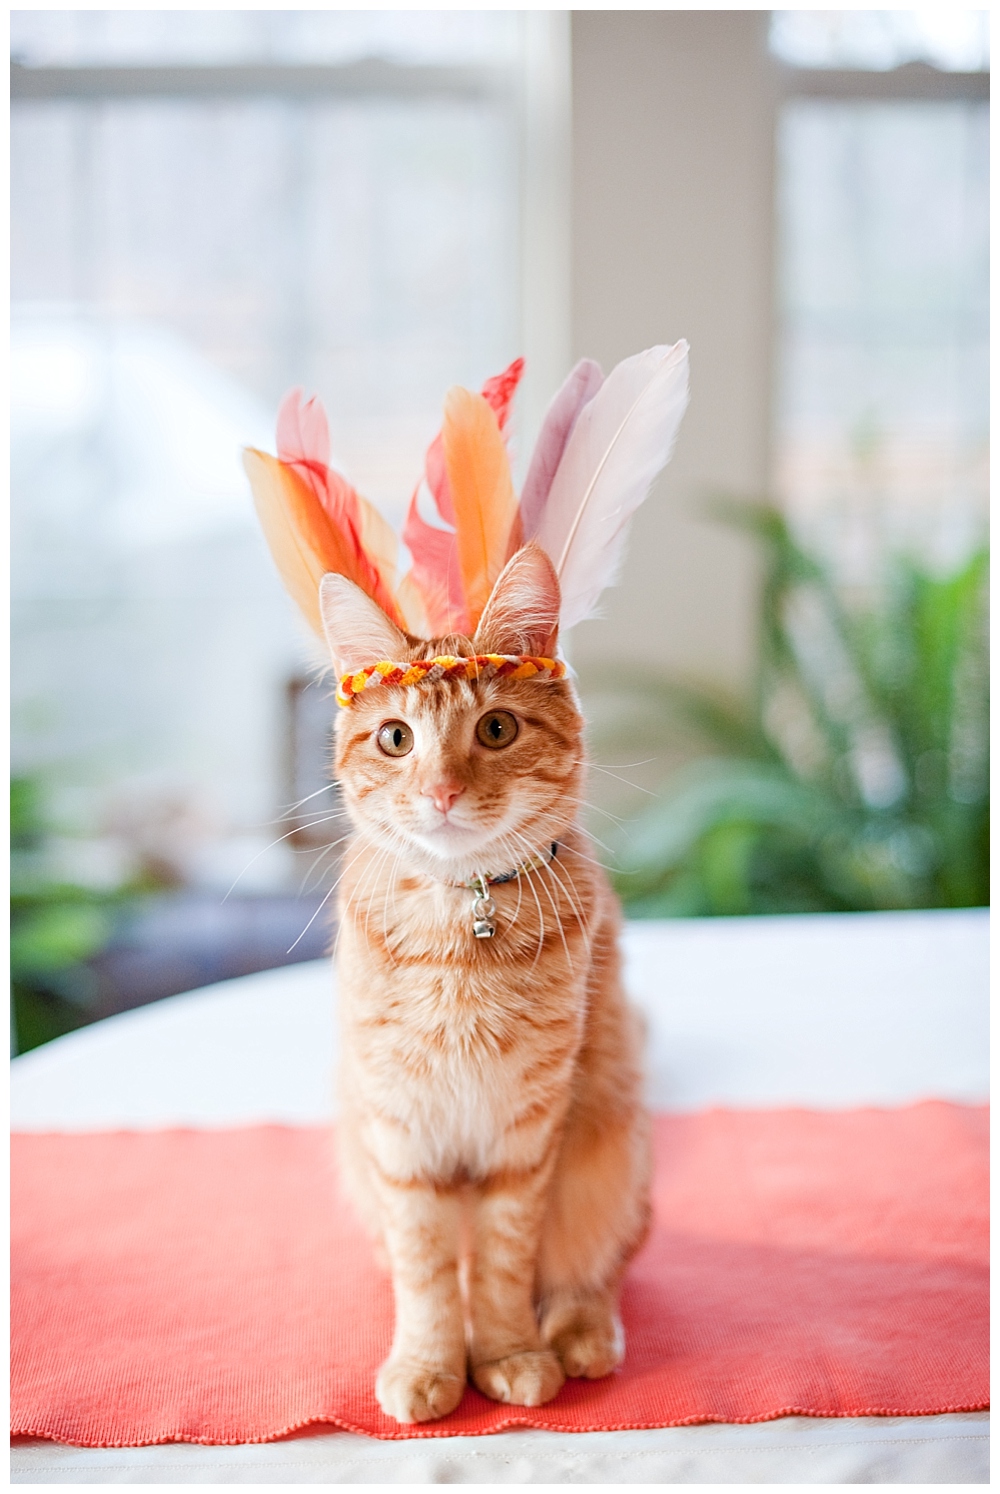 aggie the cat Orange kitten with feather hat